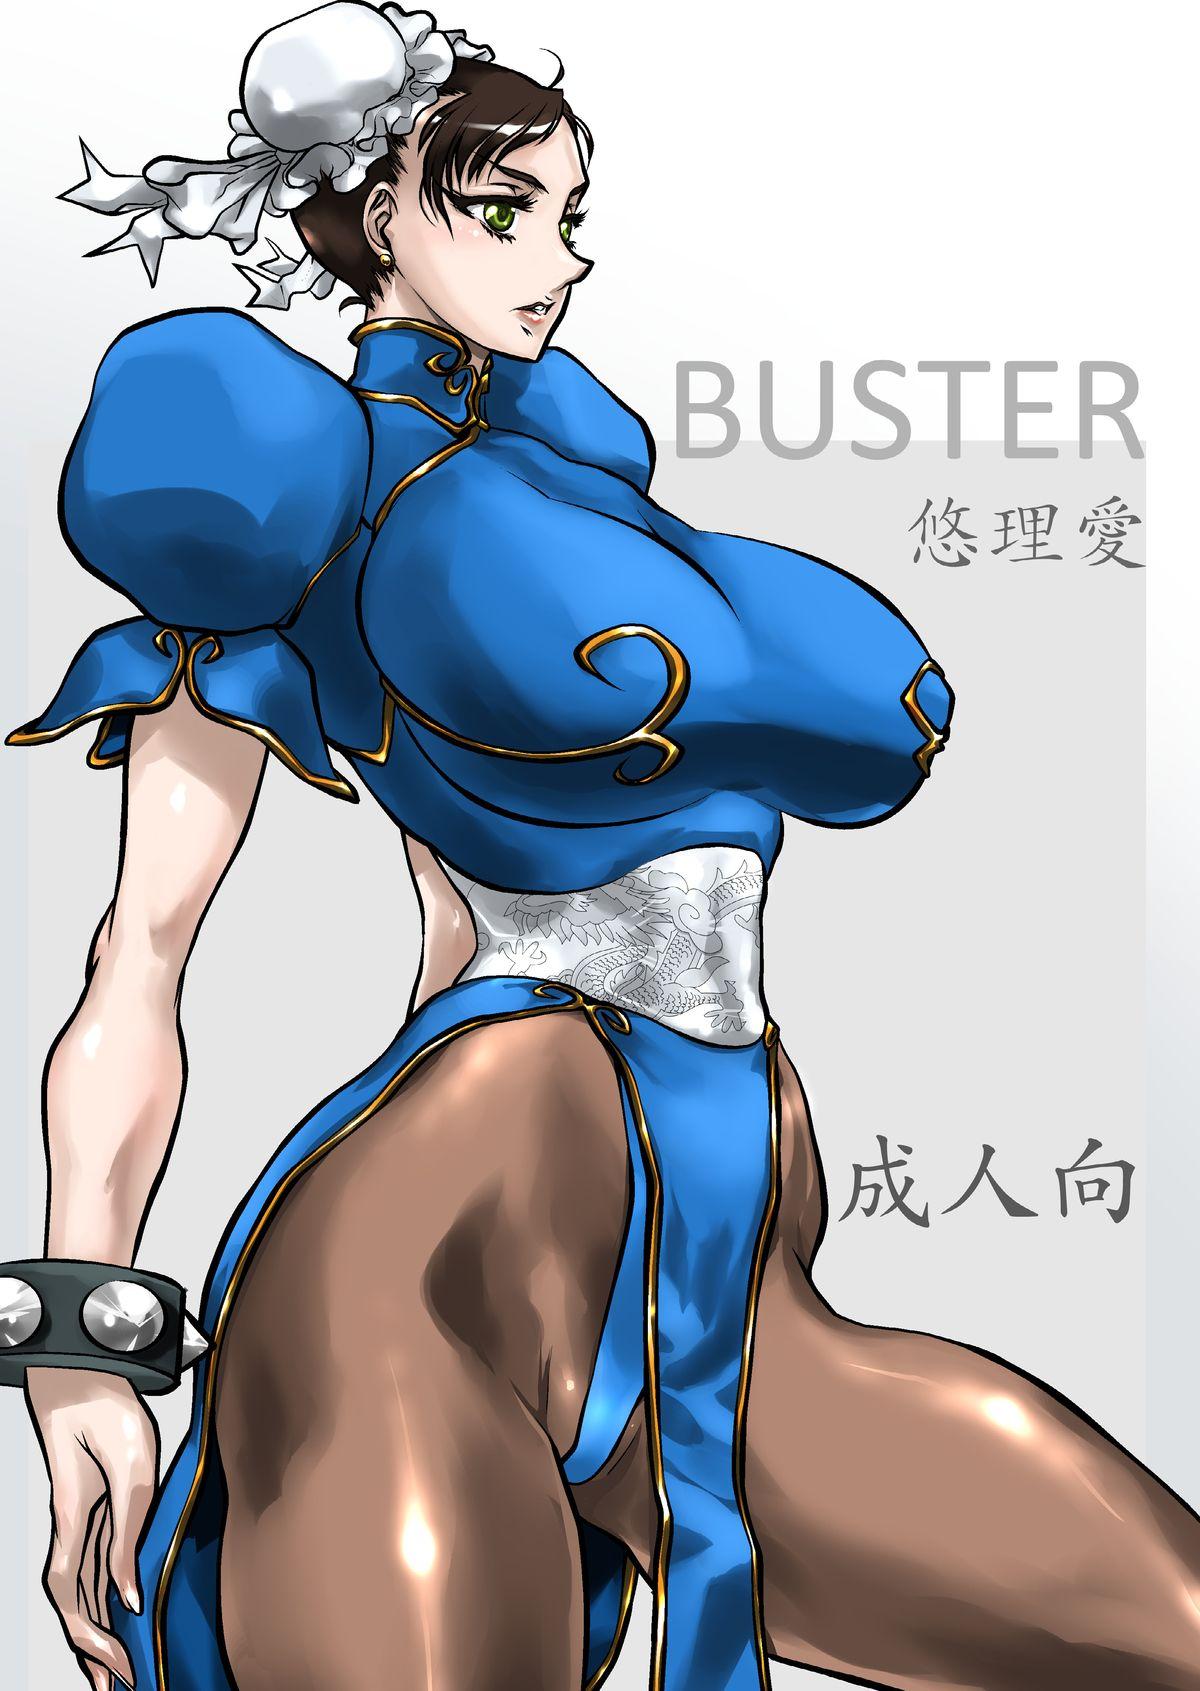 BUSTER 0